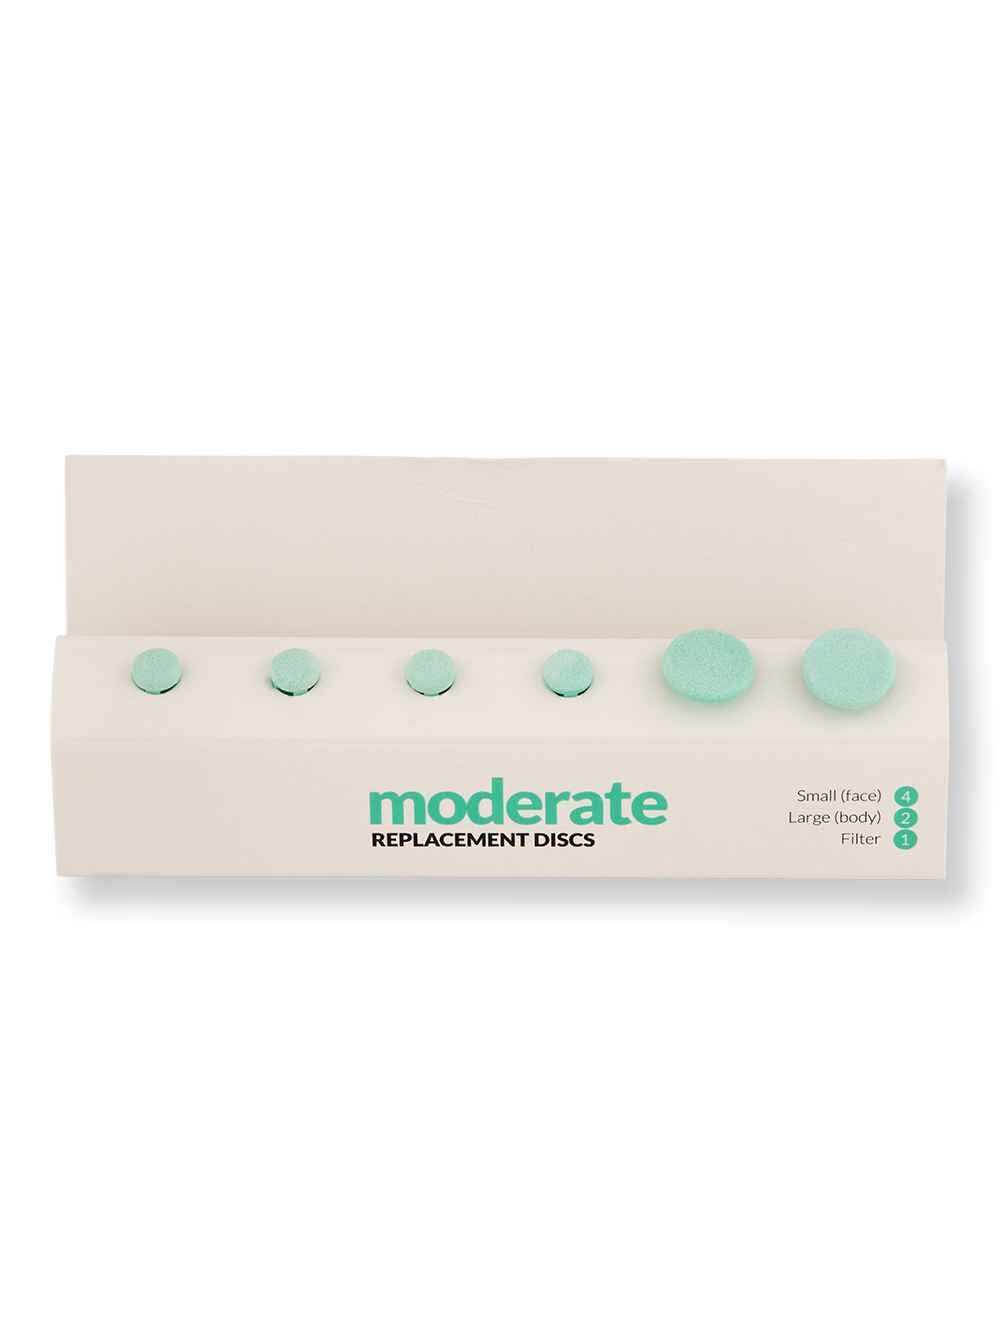 PMD PMD Green Moderate Replacement Discs Skin Care Tools & Devices 